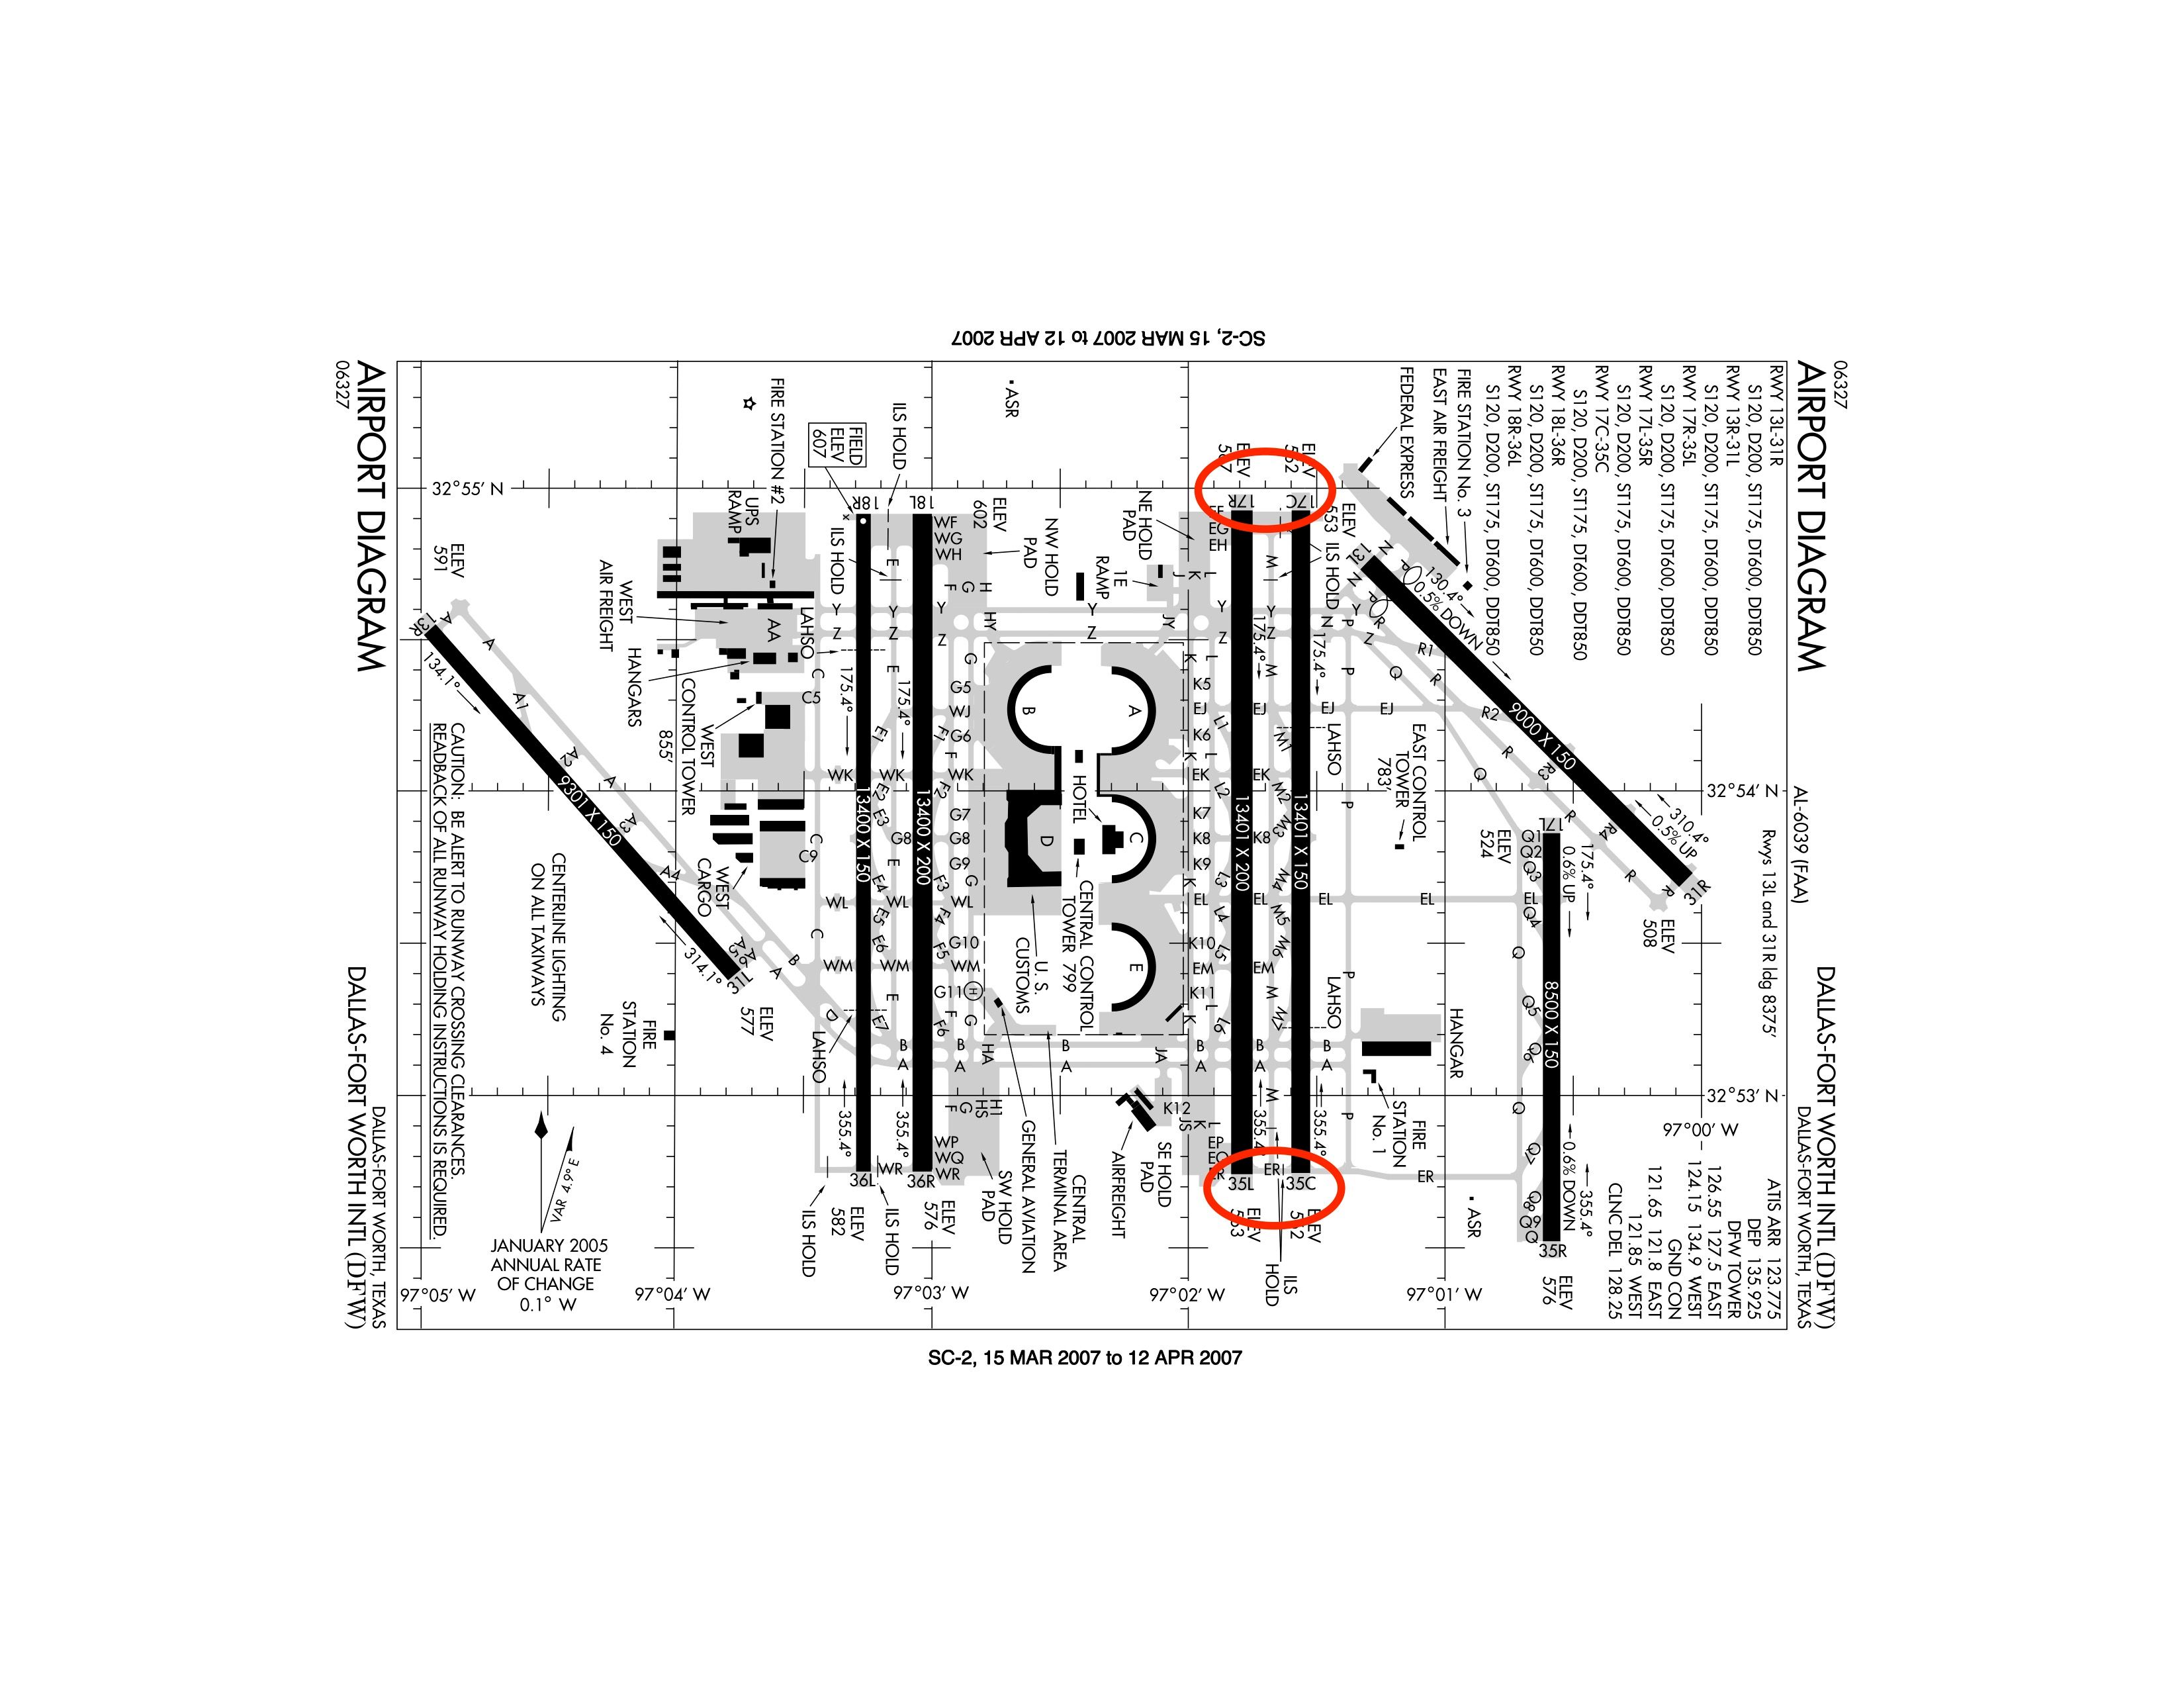 A paper diagram of Dallas Fort Worth airport.